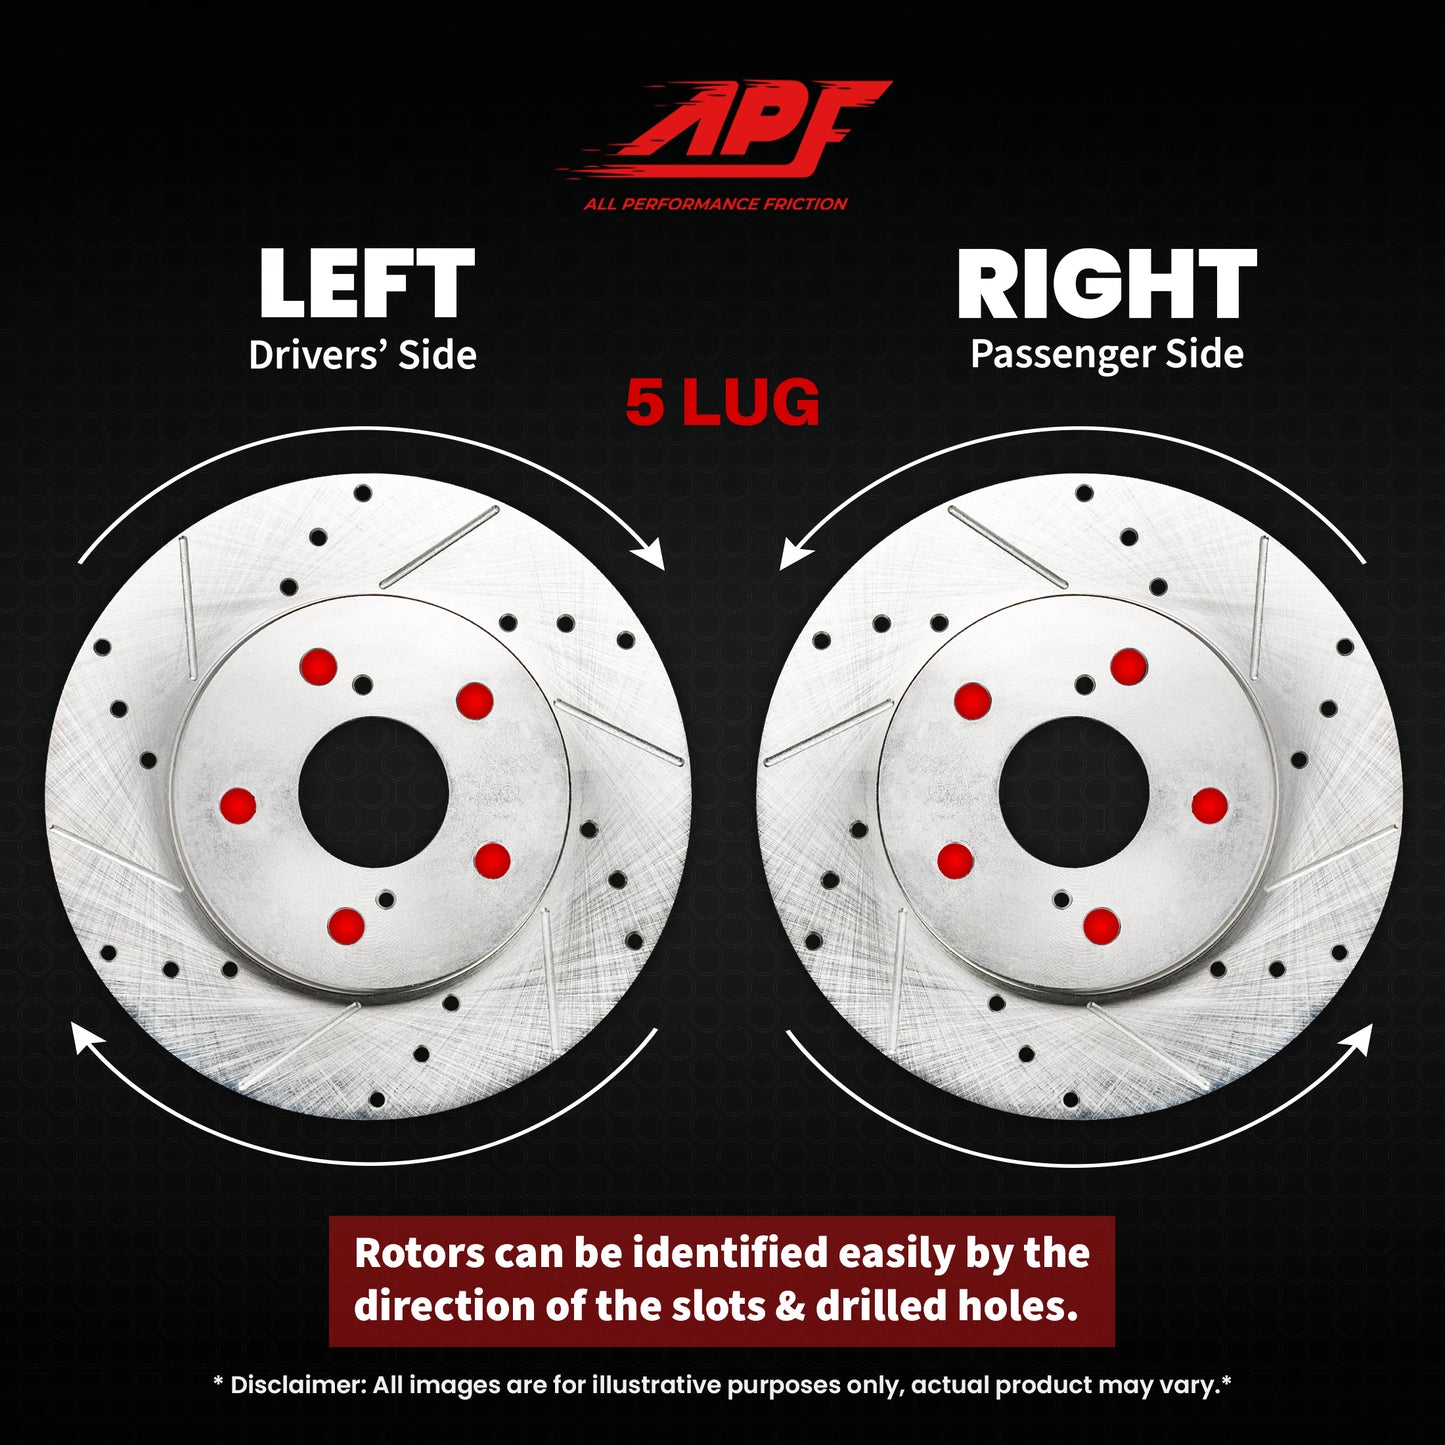 APF All Performance Friction Rear Rotors compatible with Jeep Patriot 2009-2017 Zinc Drilled Slotted Rotors | $118.4